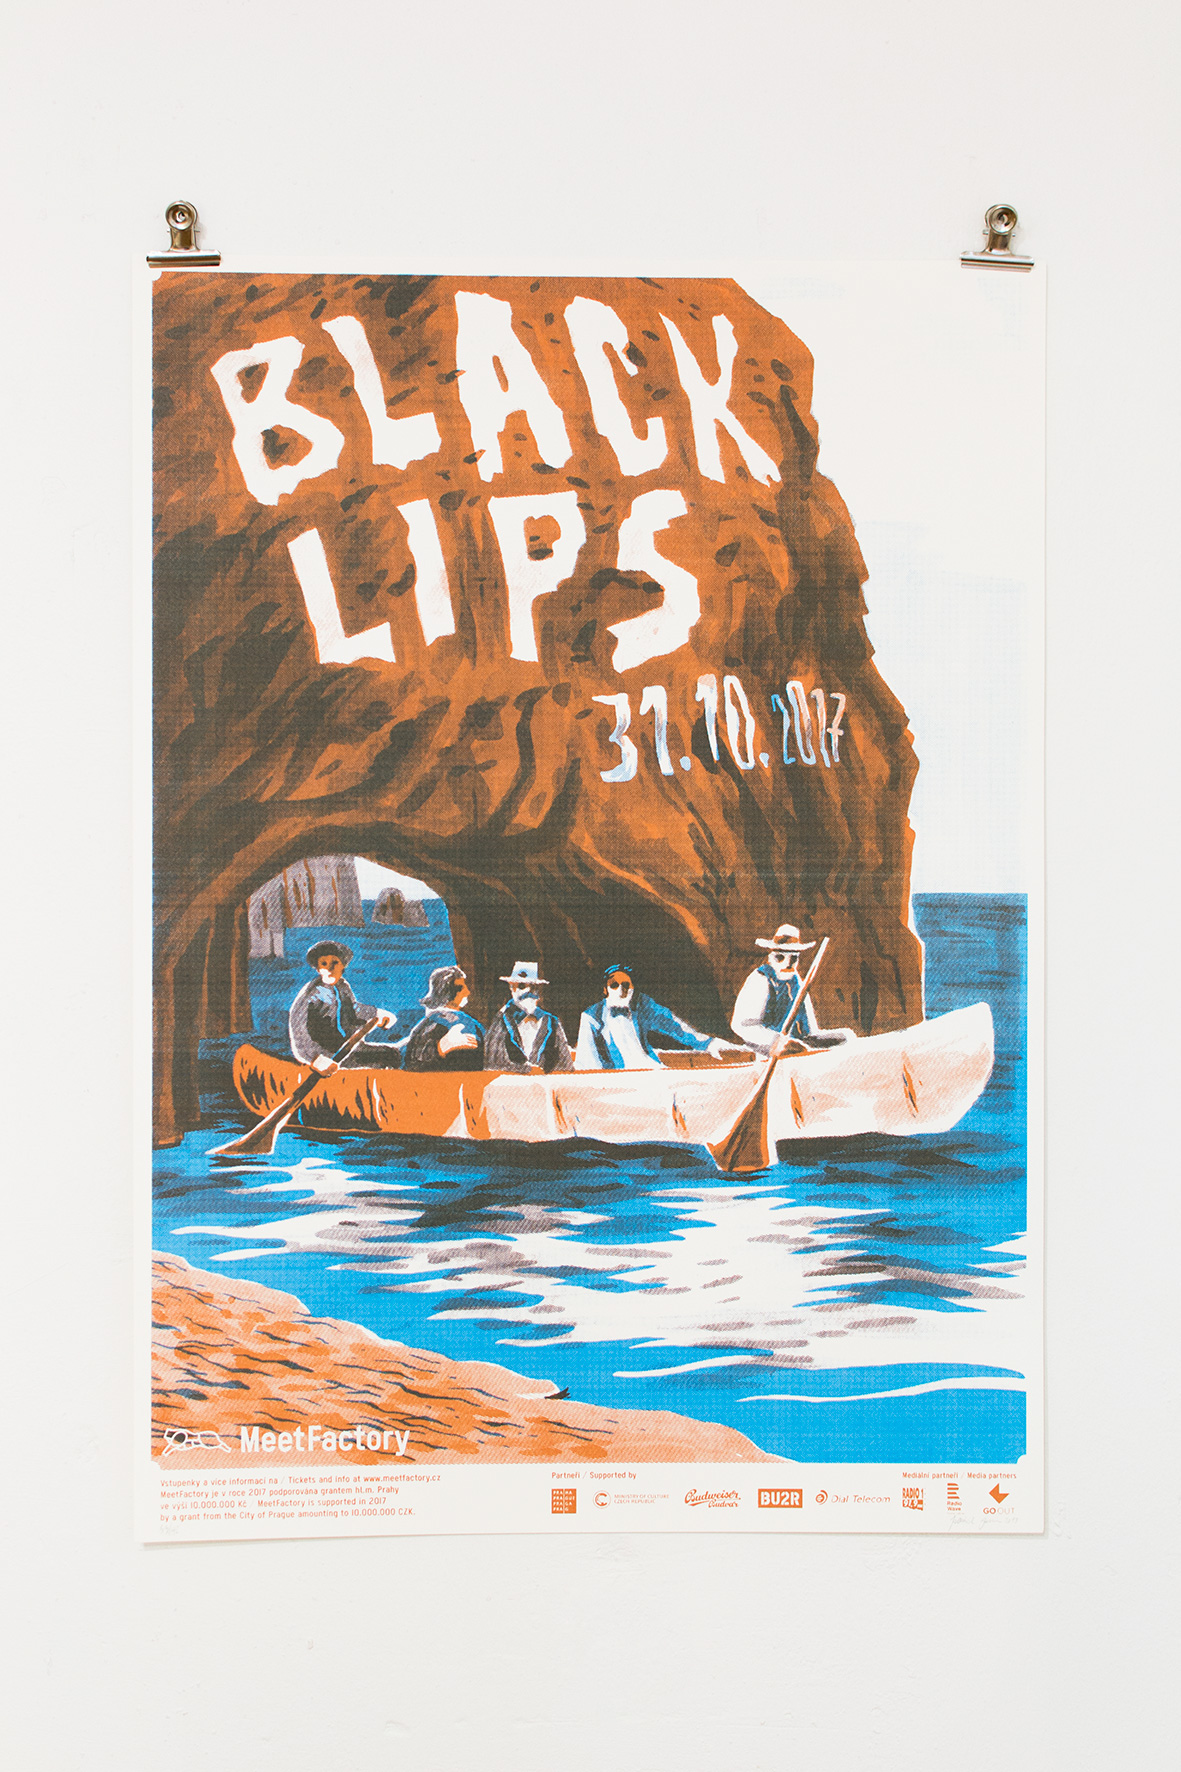 gig poster concert flyer black lips club Promotion beach fossils of montral